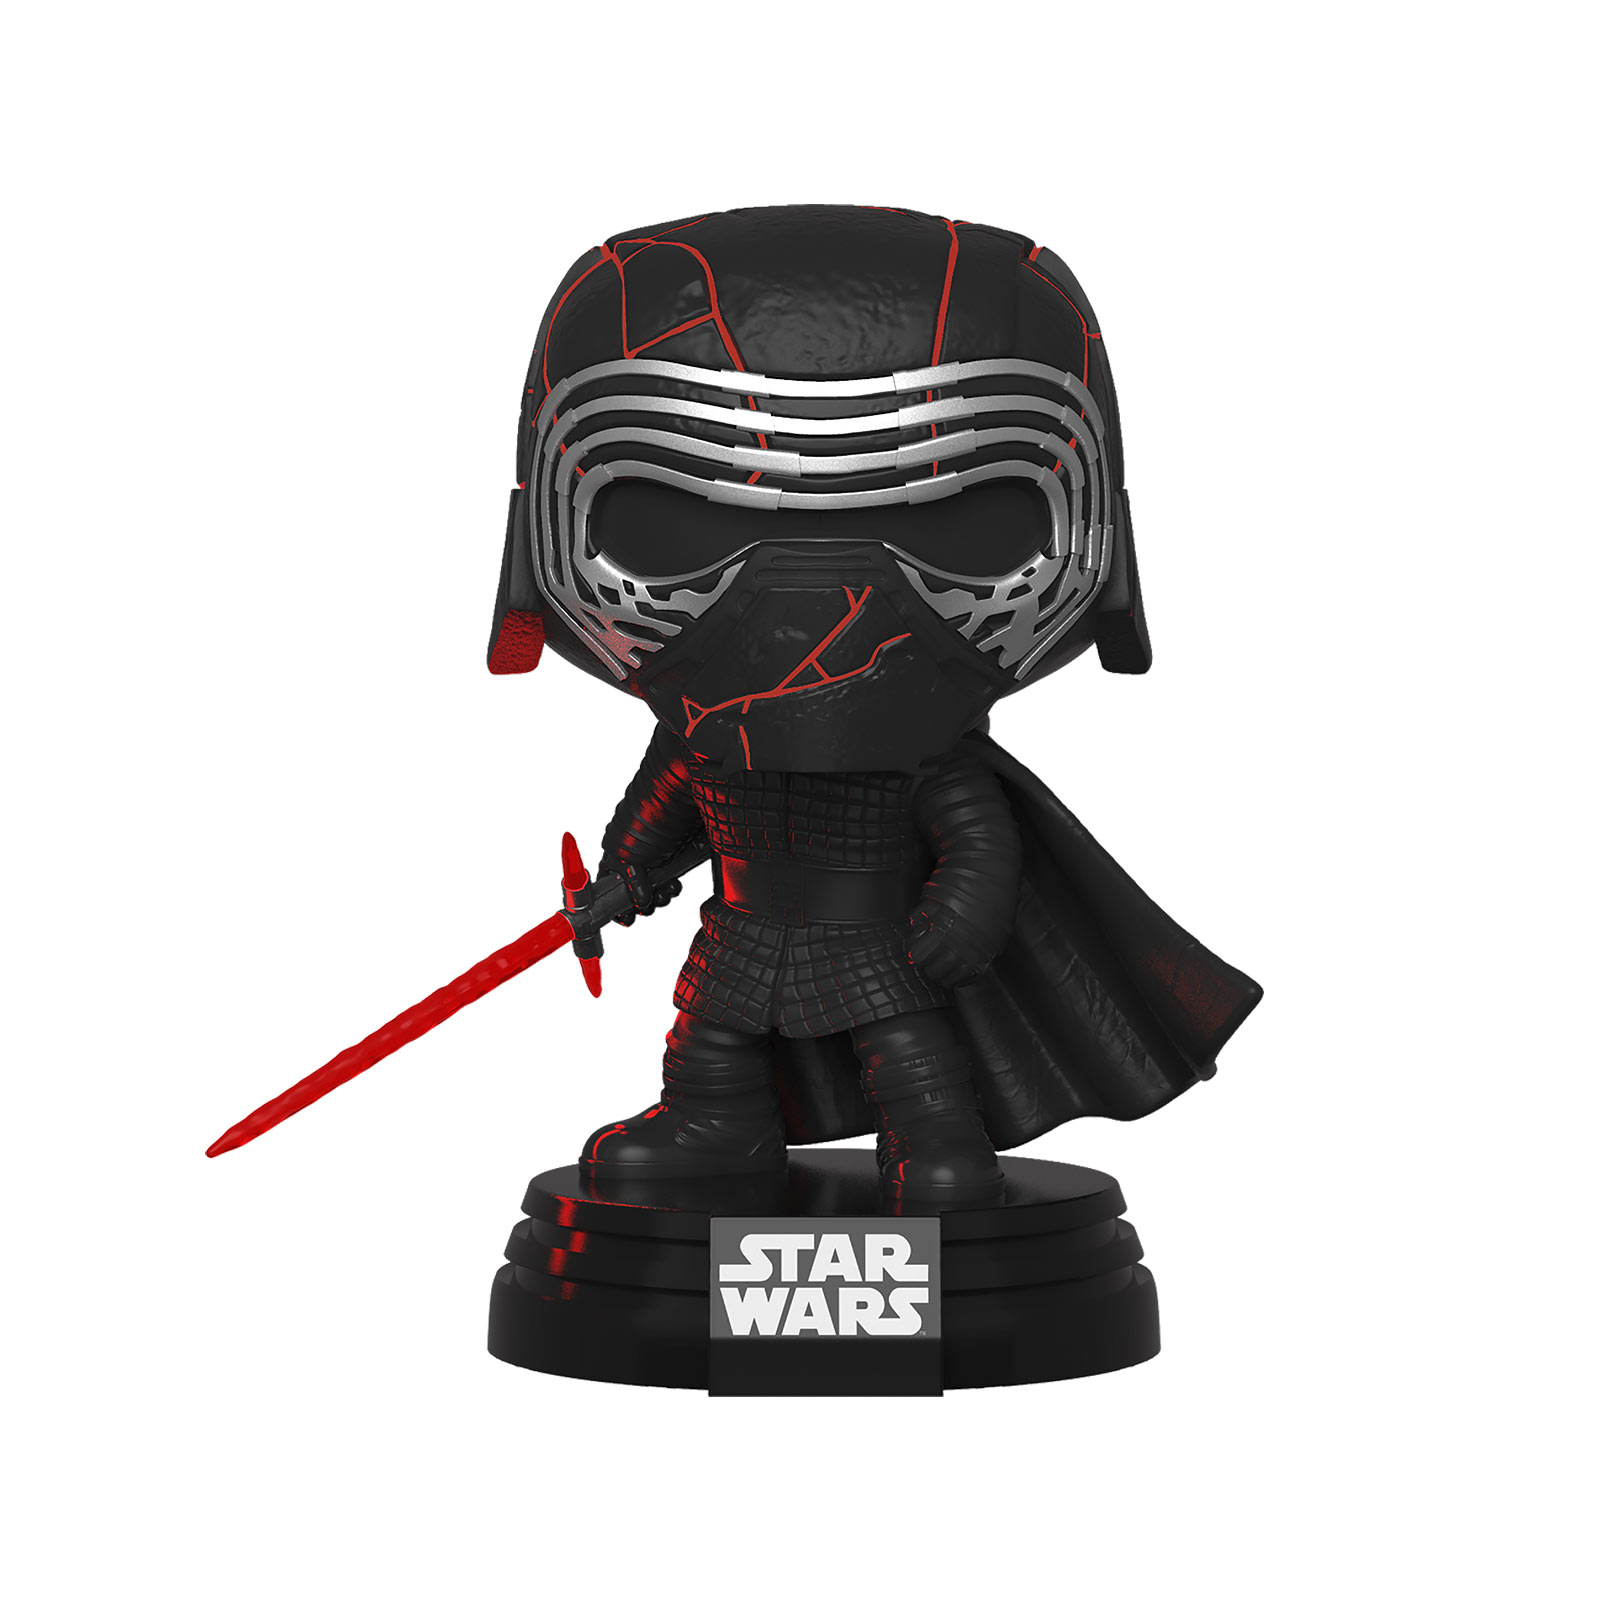 Star Wars - Kylo Ren Funko Pop bobblehead figure with light and sound